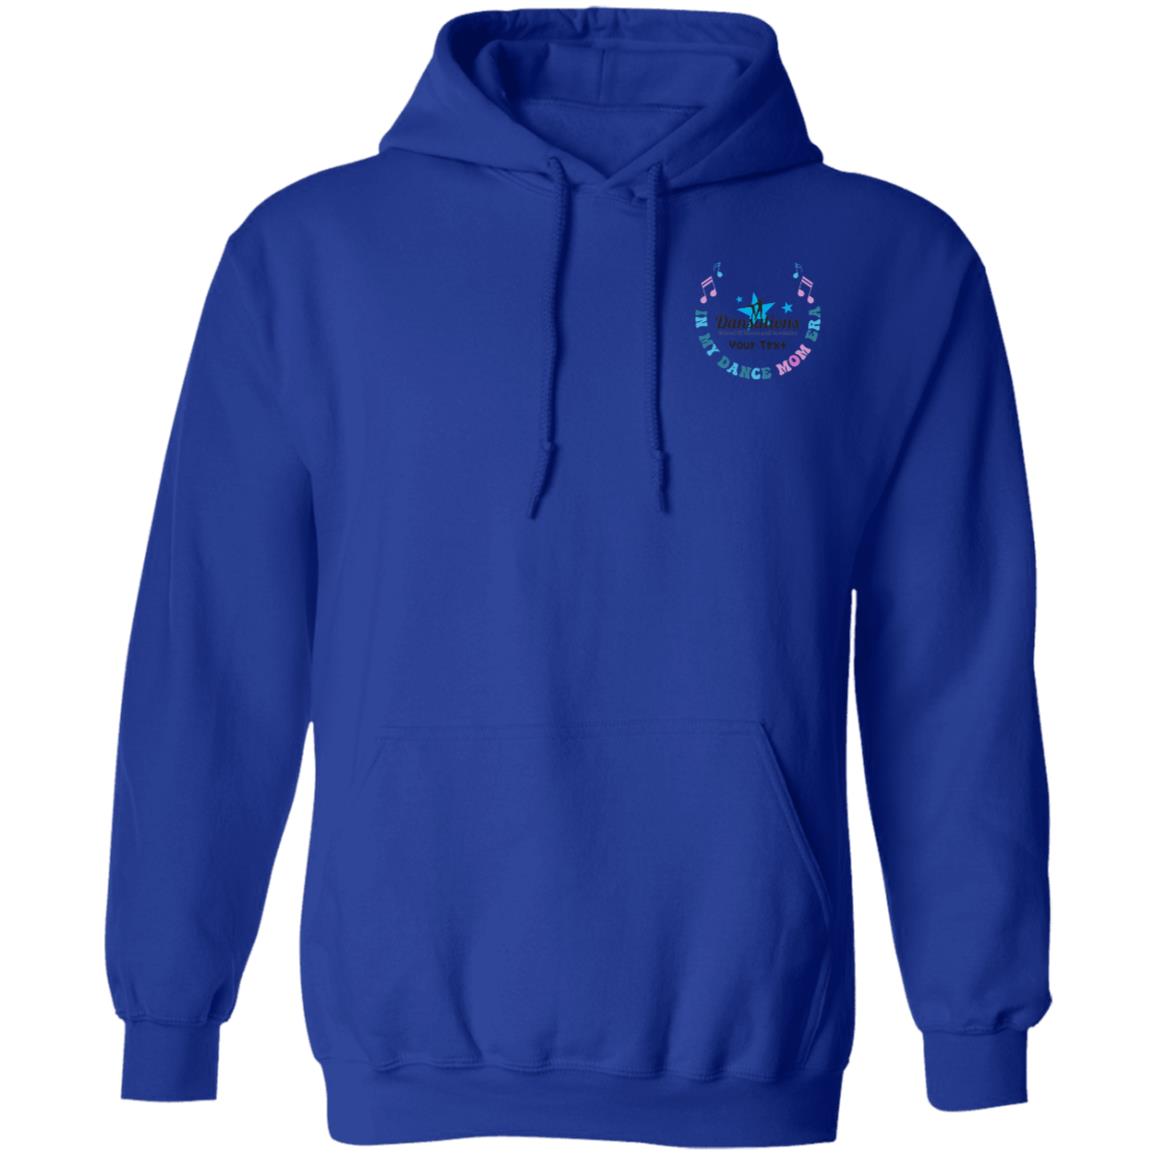 Dansations In My Dance Mom Era Pullover Hoodie - With Personalization